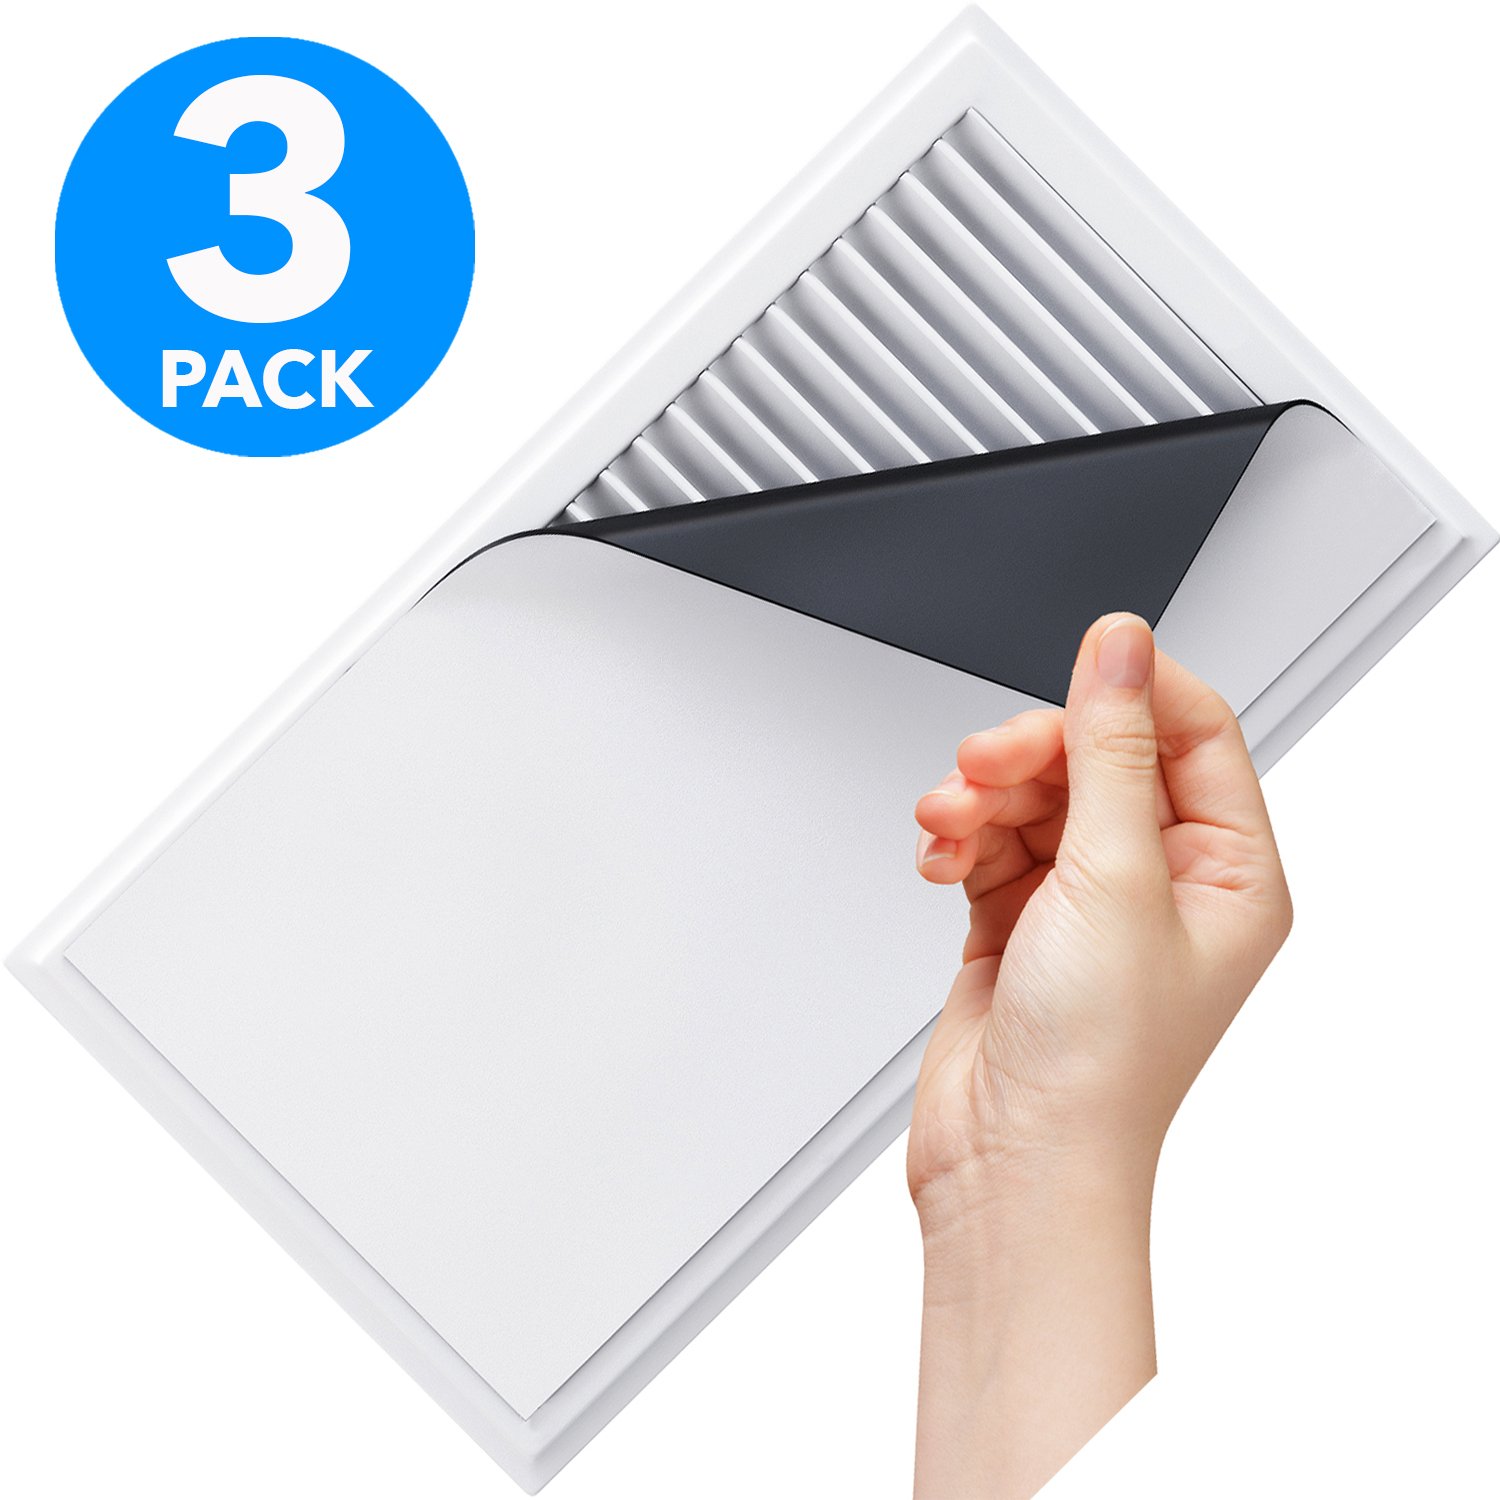 Home Intuition Vent Cover, 8Inch x 15Inch, 3Pack eBay